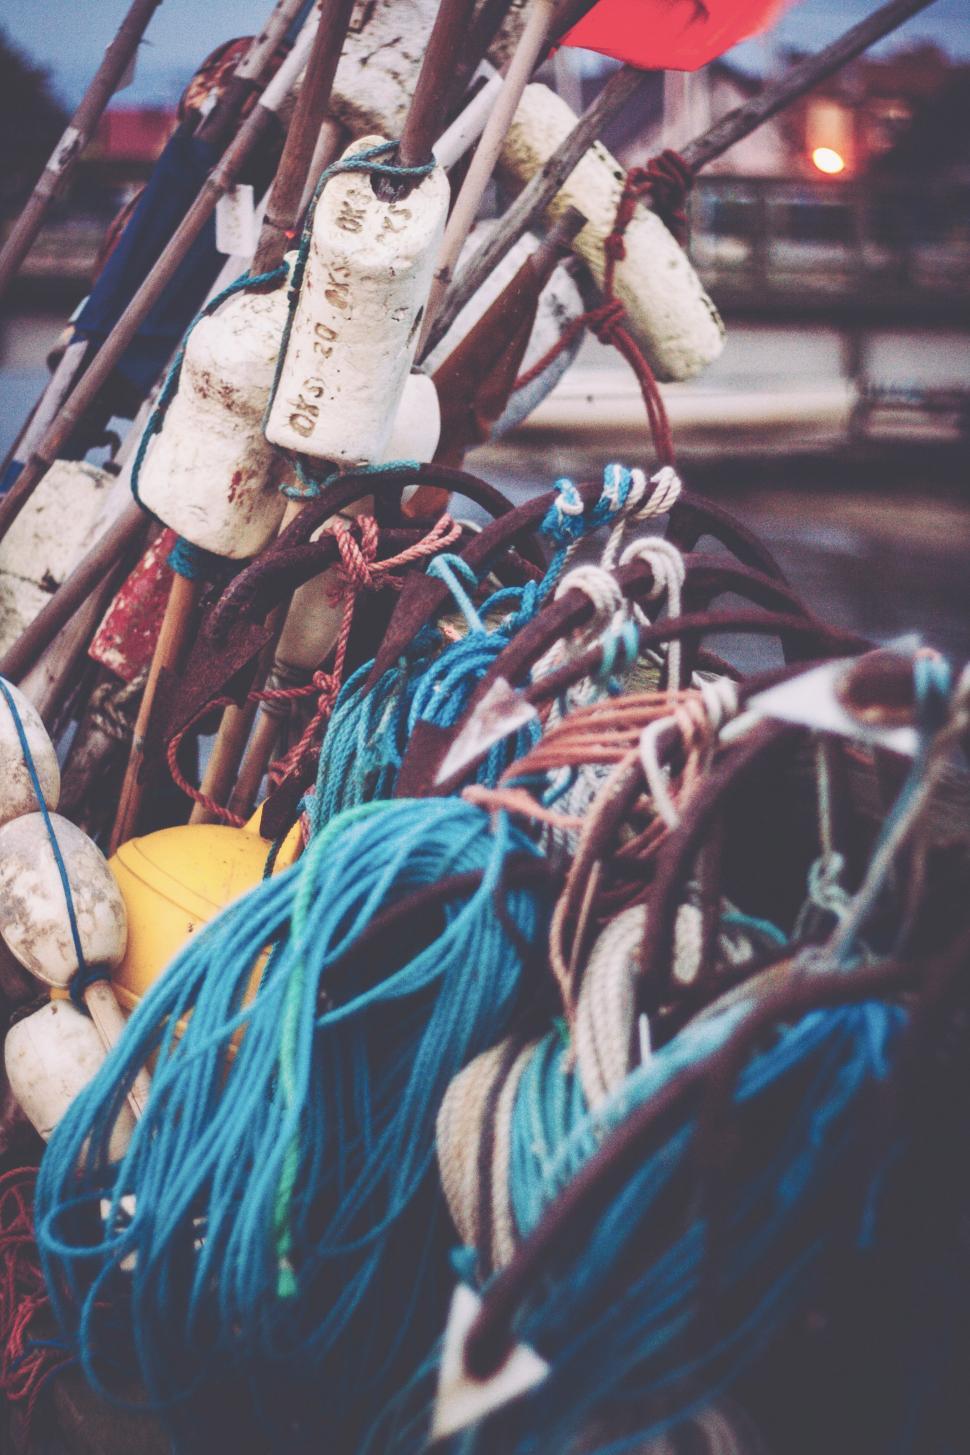 Free Image of Pile of Fishing Nets and Ropes on a Dock 